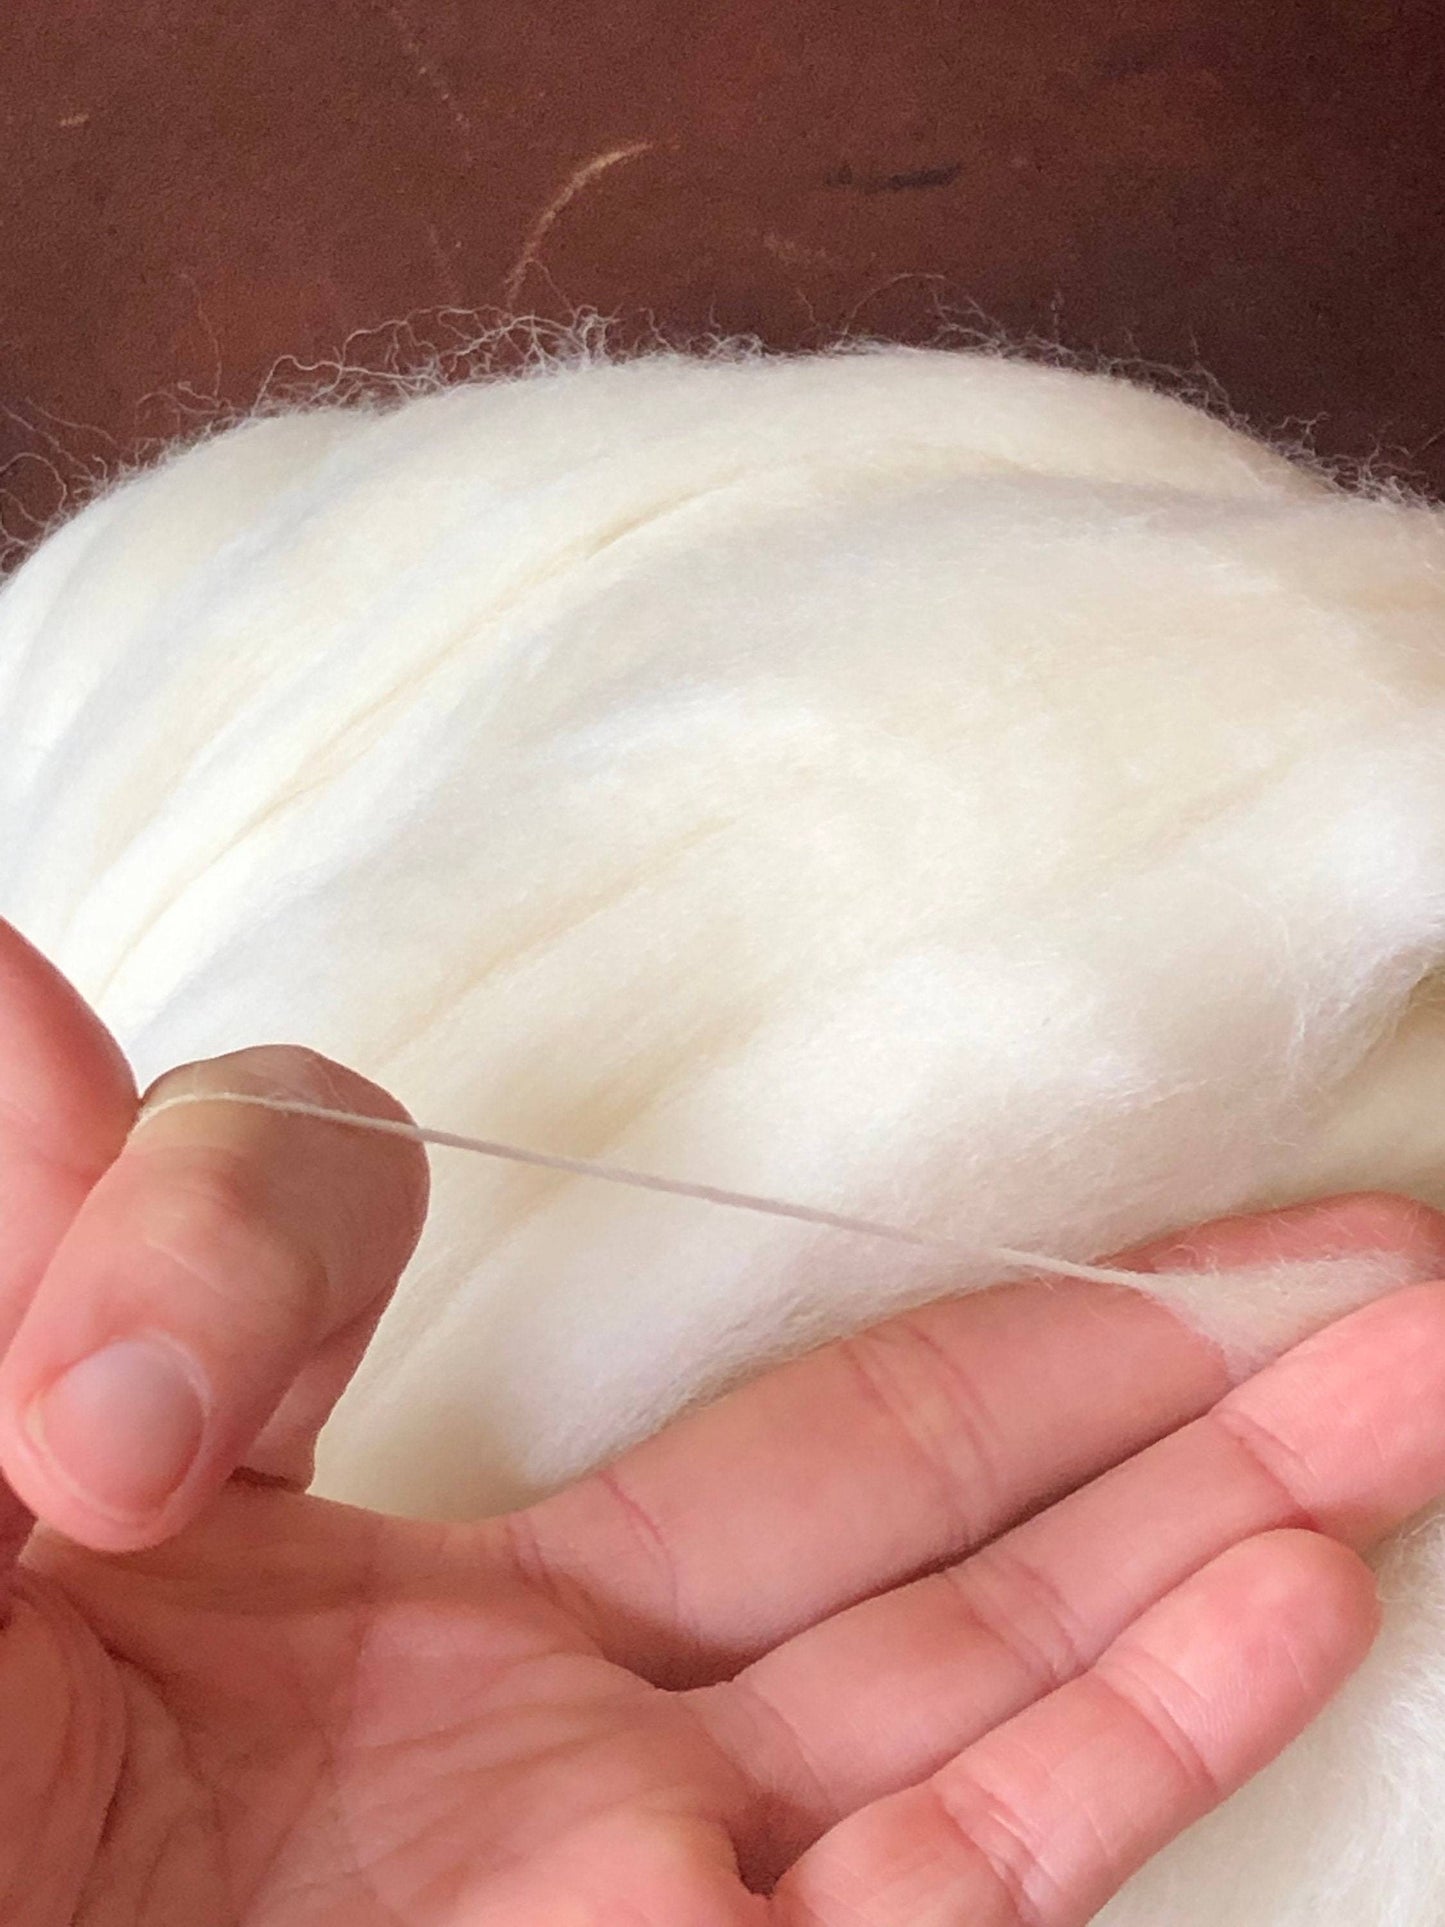 Falkland white wool top 1lb for spinning, dying, crafts, felting, weaving tapestry, knitting etc..Beautiful high quality!